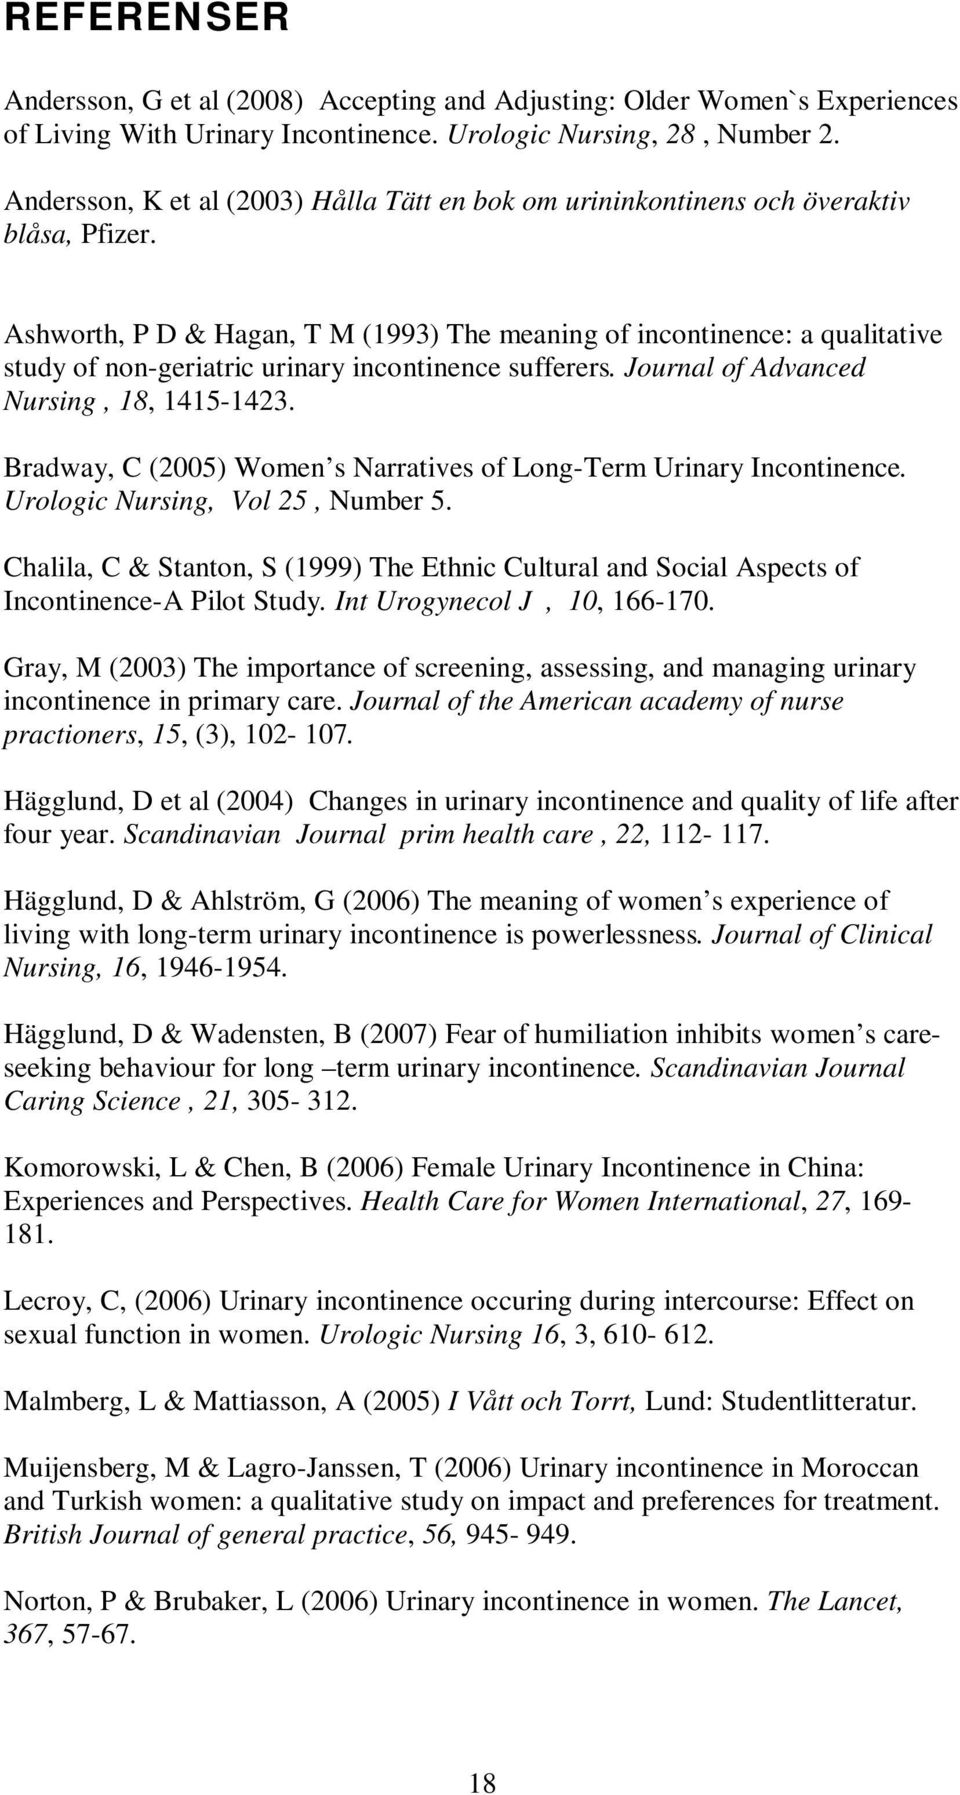 Ashworth, P D & Hagan, T M (1993) The meaning of incontinence: a qualitative study of non-geriatric urinary incontinence sufferers. Journal of Advanced Nursing, 18, 1415-1423.